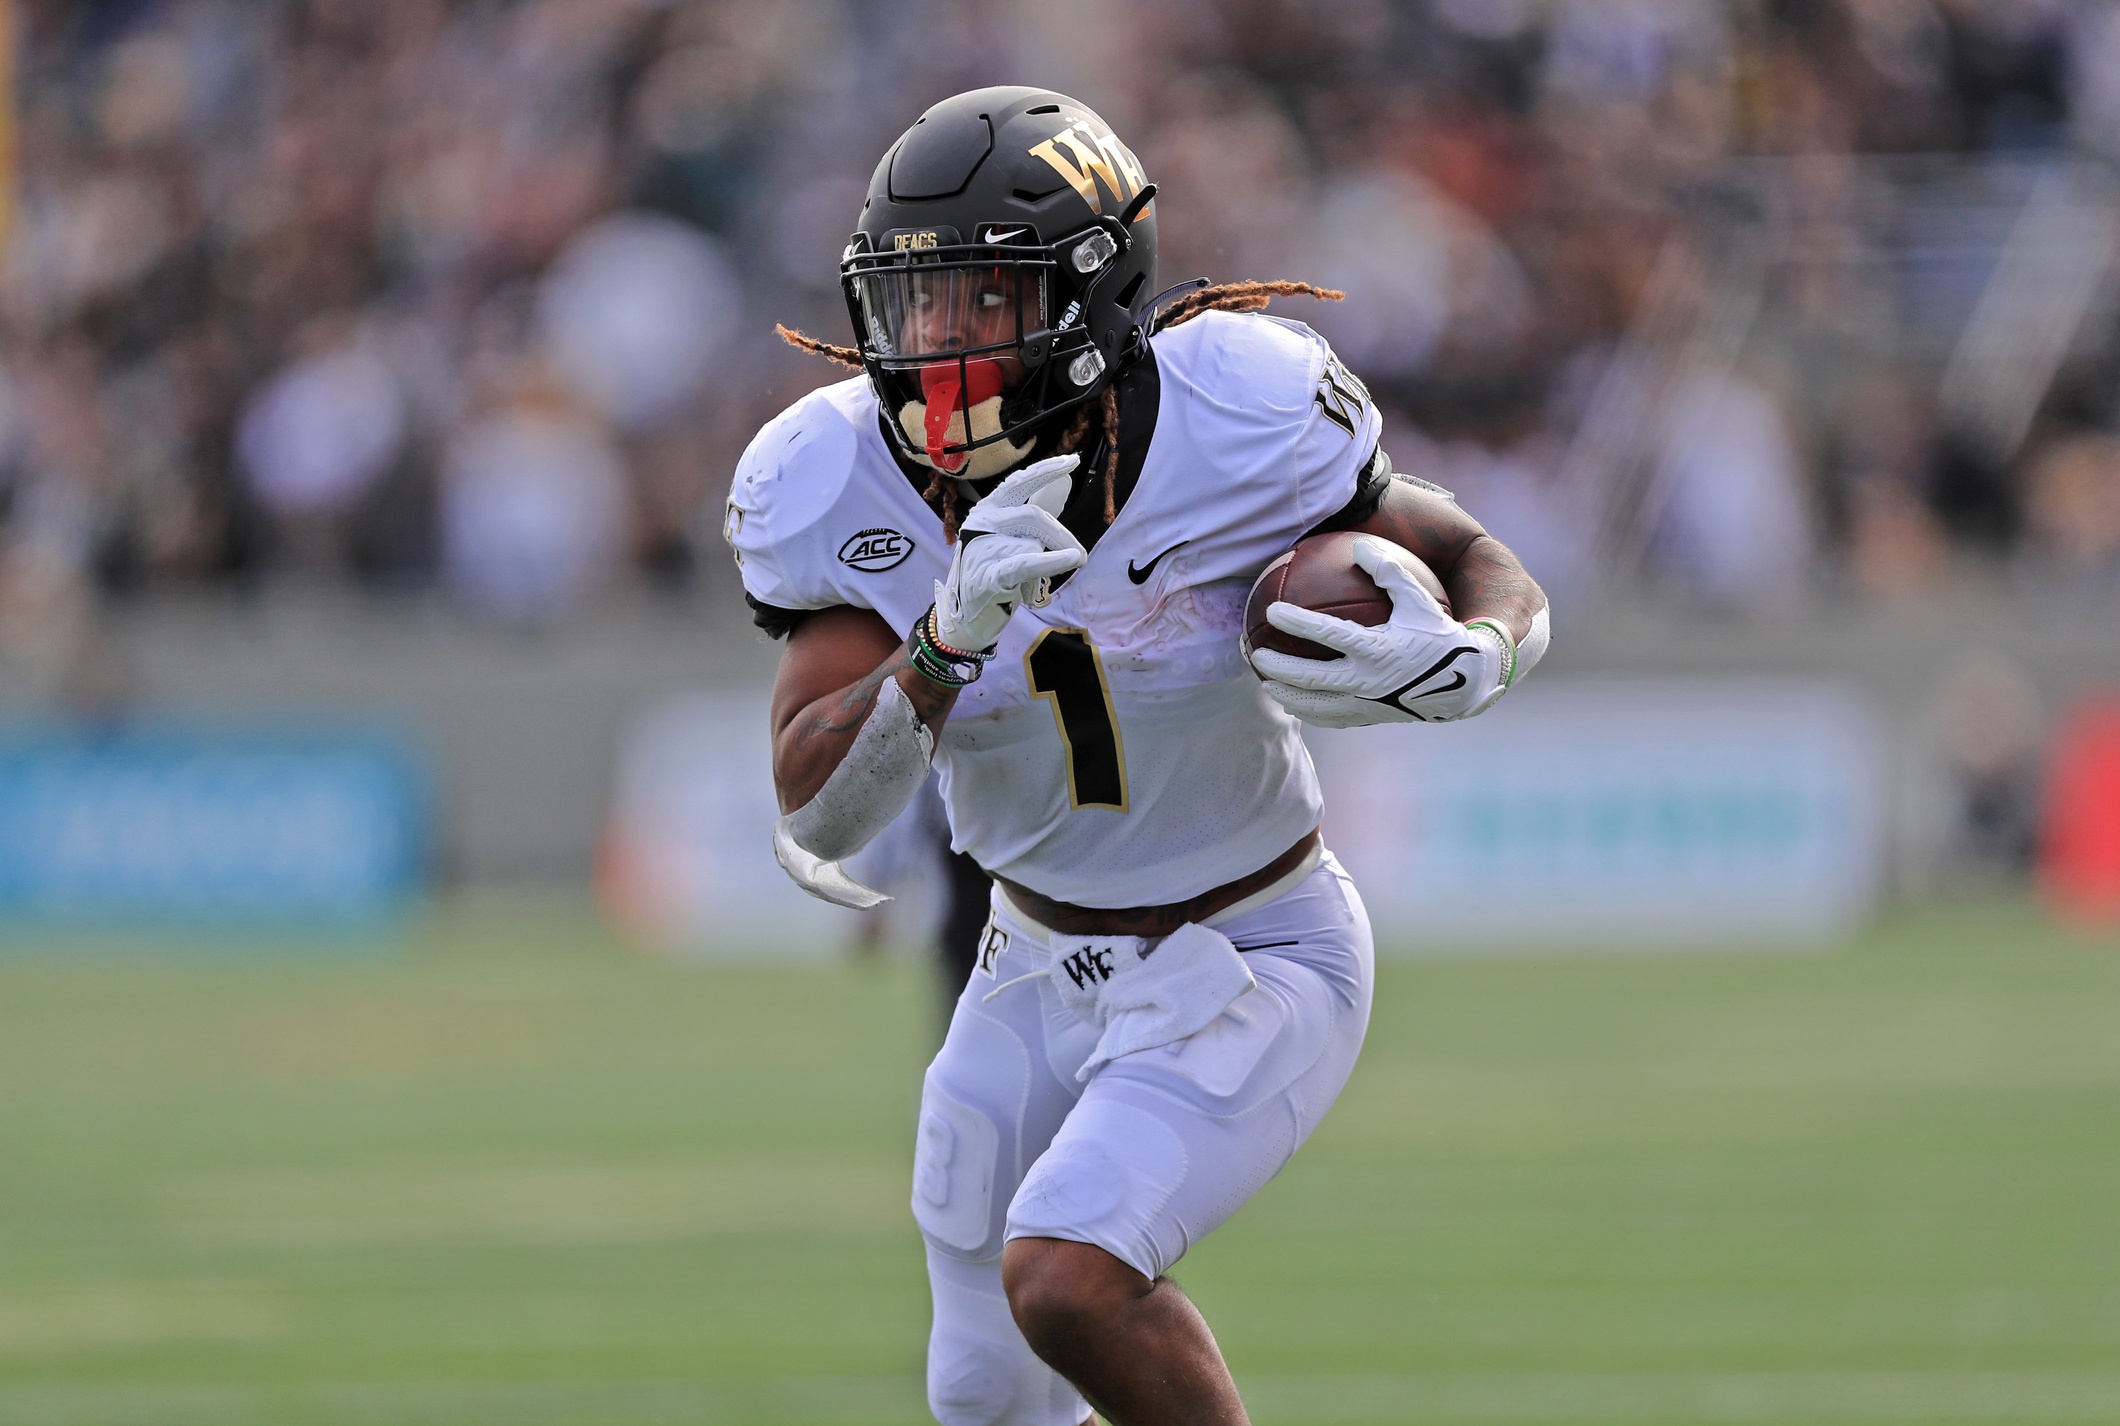 college football picks Christian Beal-Smith wake forest demon deacons predictions best bet odds